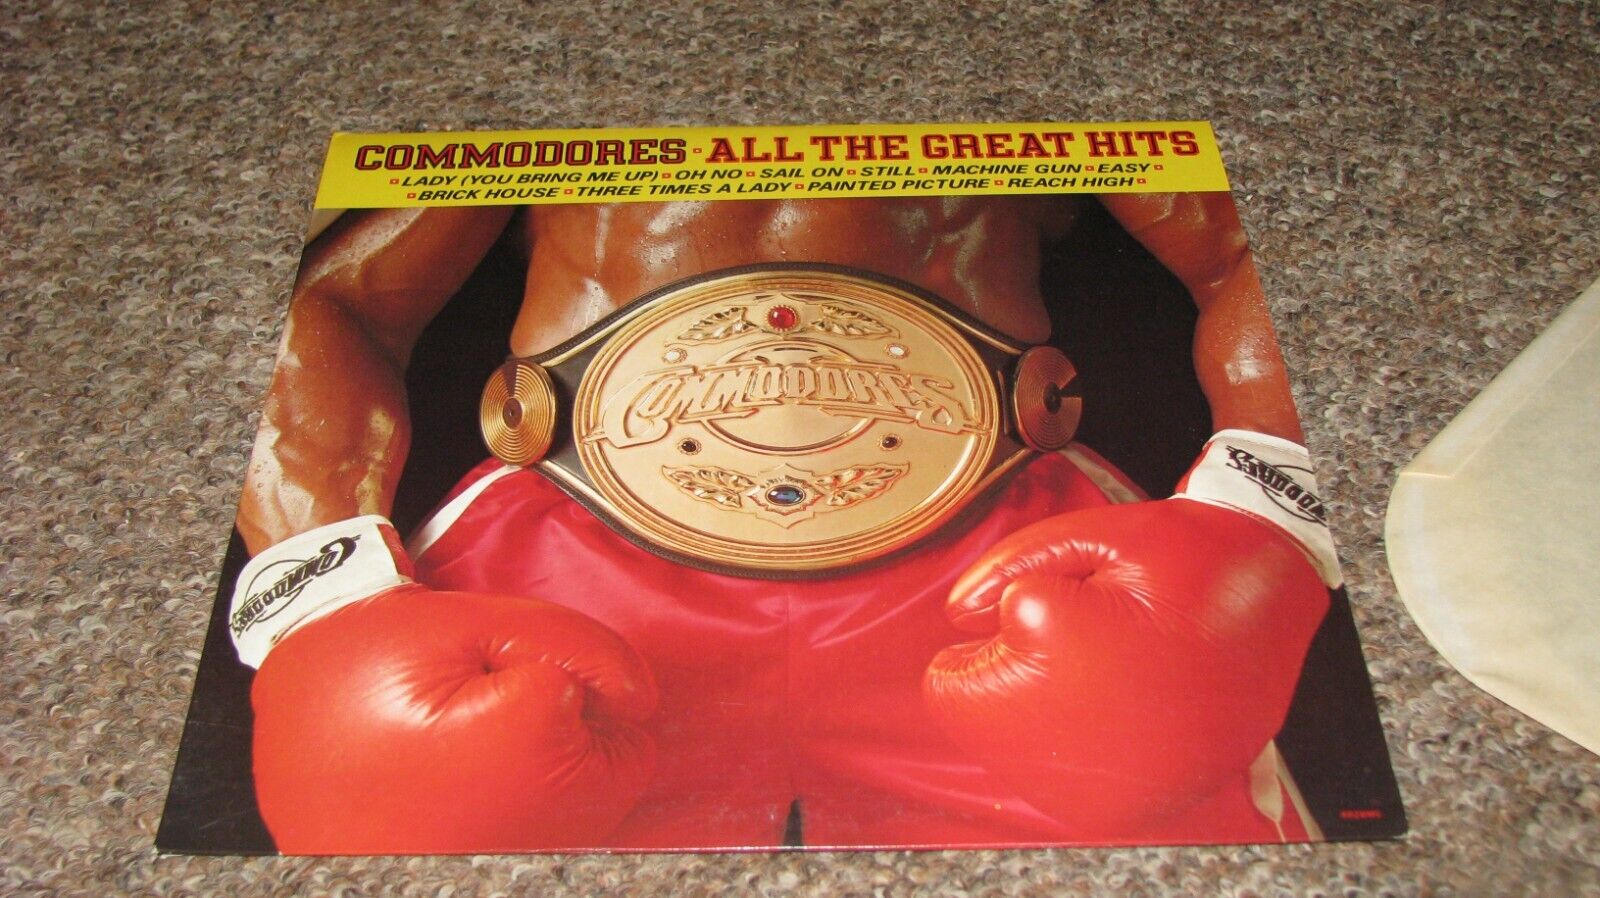 Commodores All The Great Hits Vinyl Record 1982 Club Edition Funk Soul R&B LP